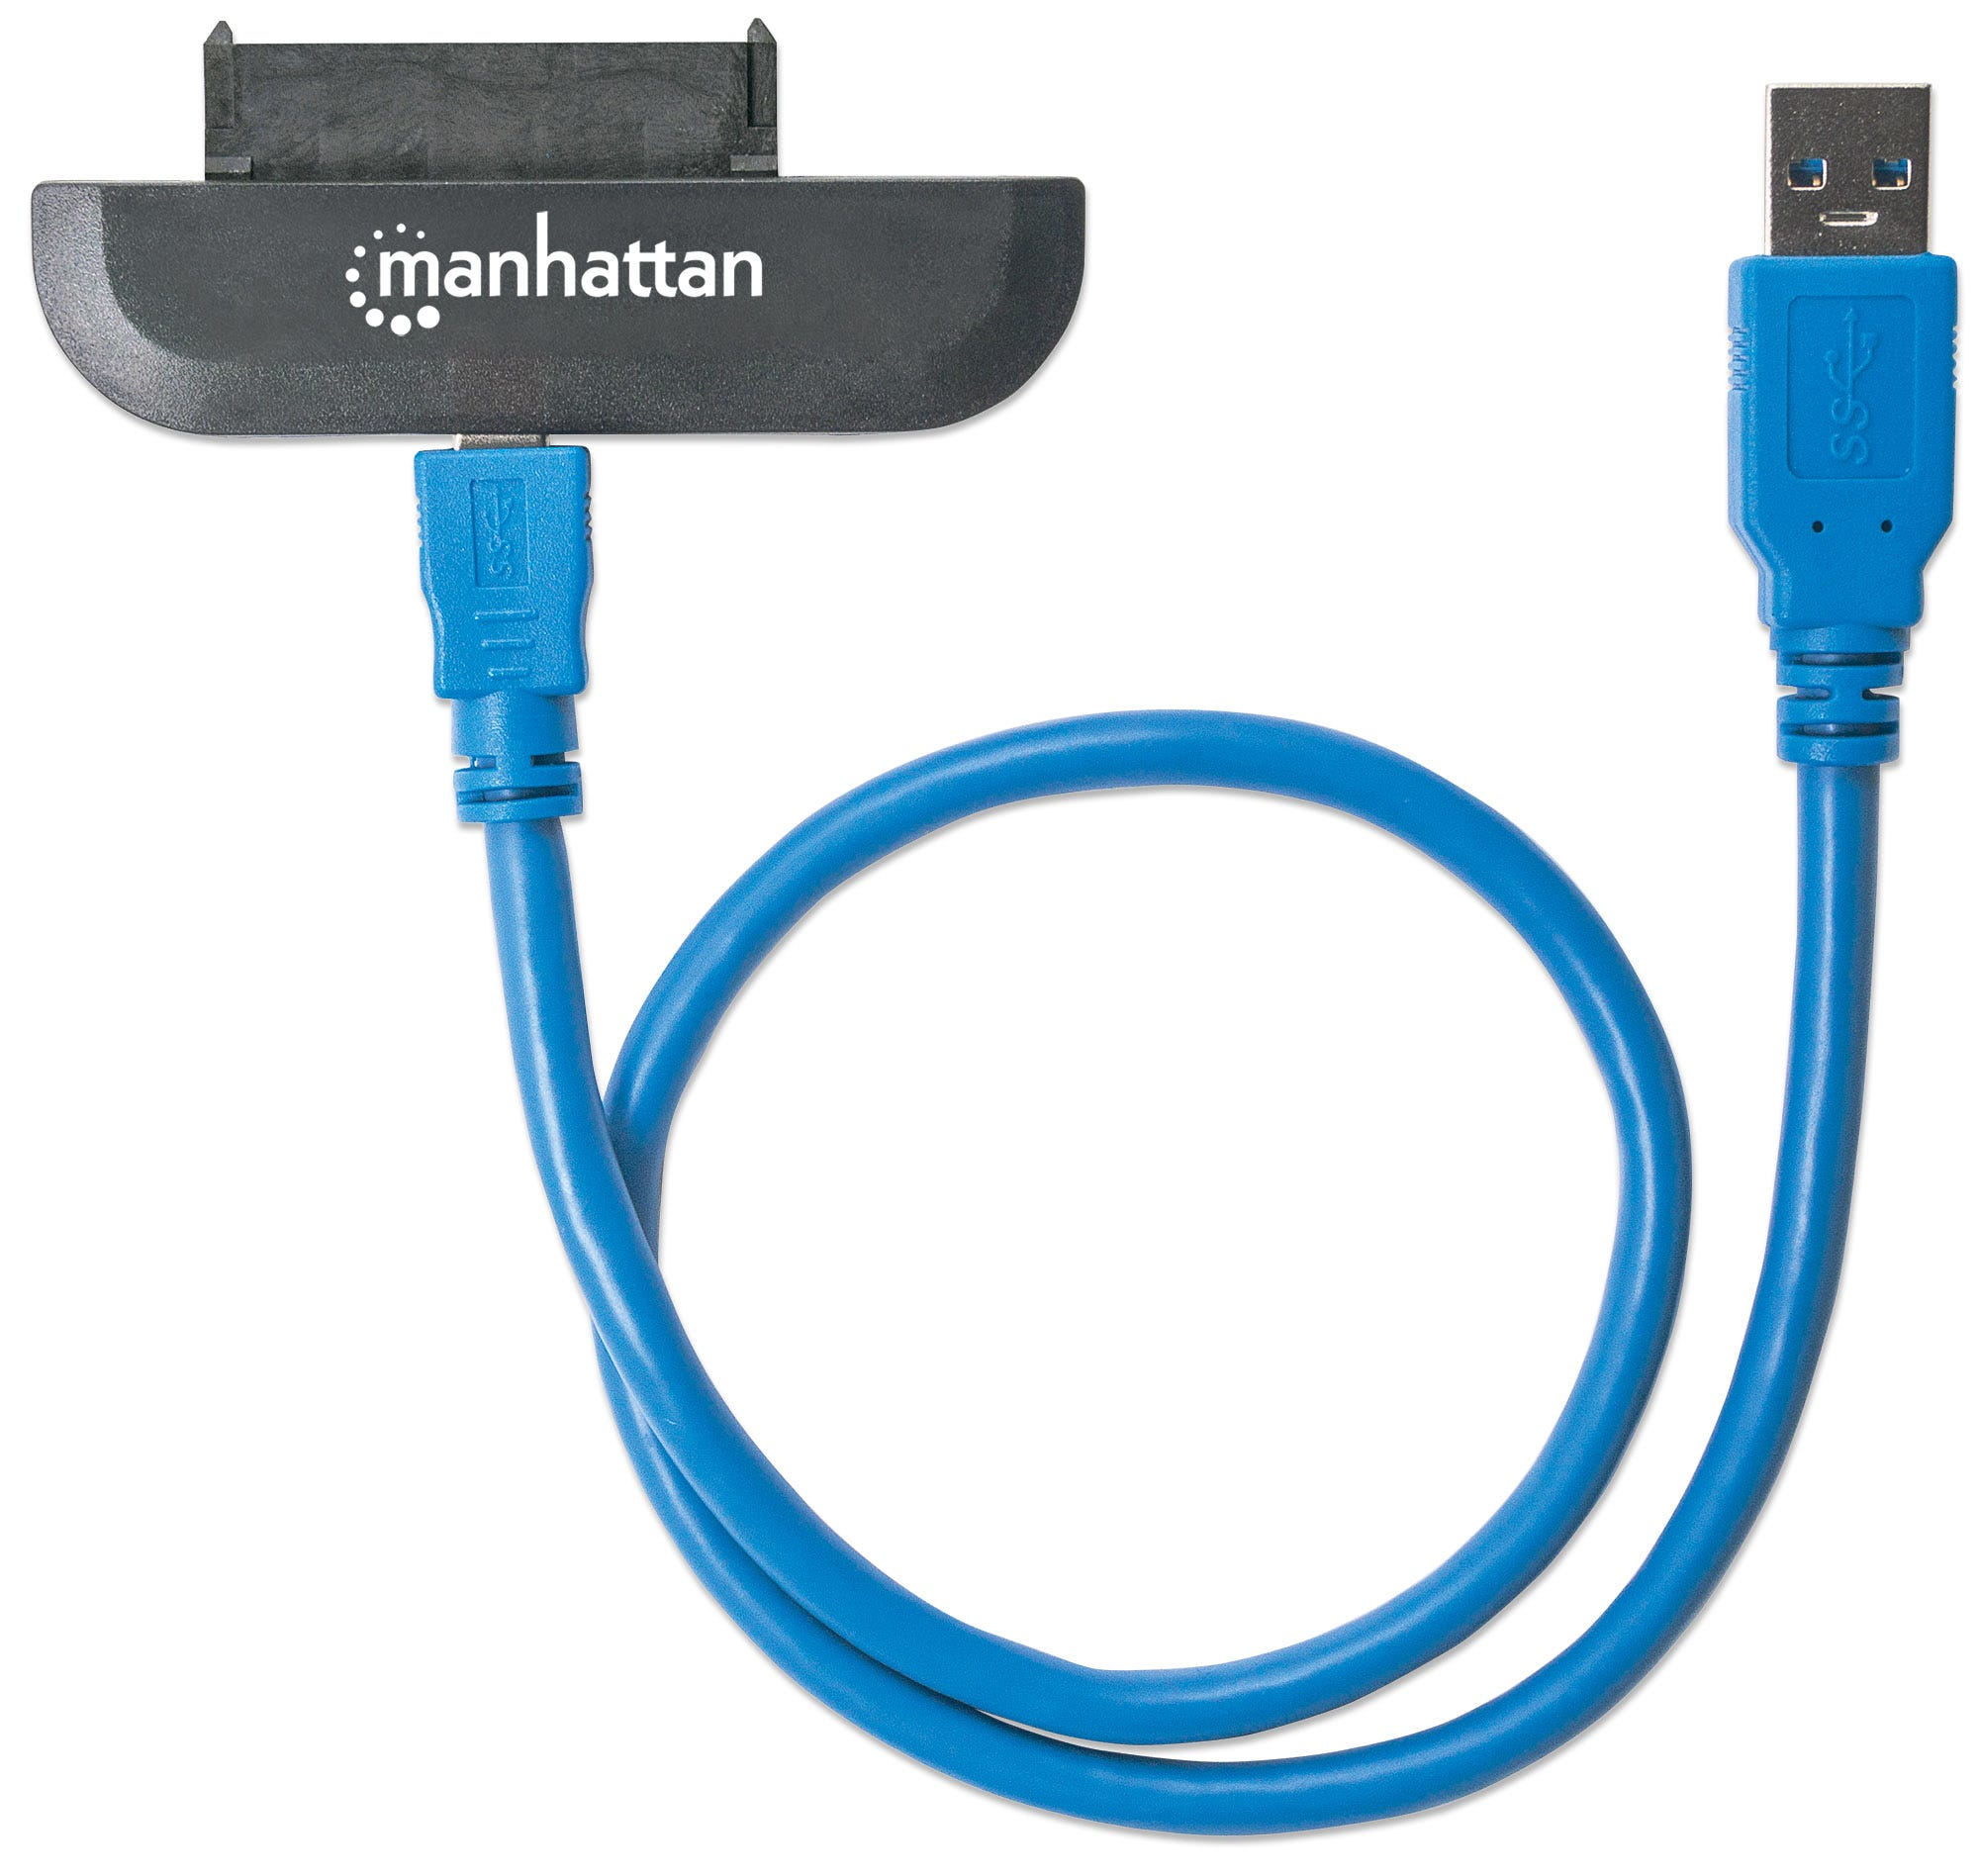 Manhattan USB-A to SATA 2.5&quot; Adapter Cable, 42cm, Male to Male, 5 Gbps (USB 3.2 Gen1 aka USB 3.0), Supports 48-bit LBA, Blister